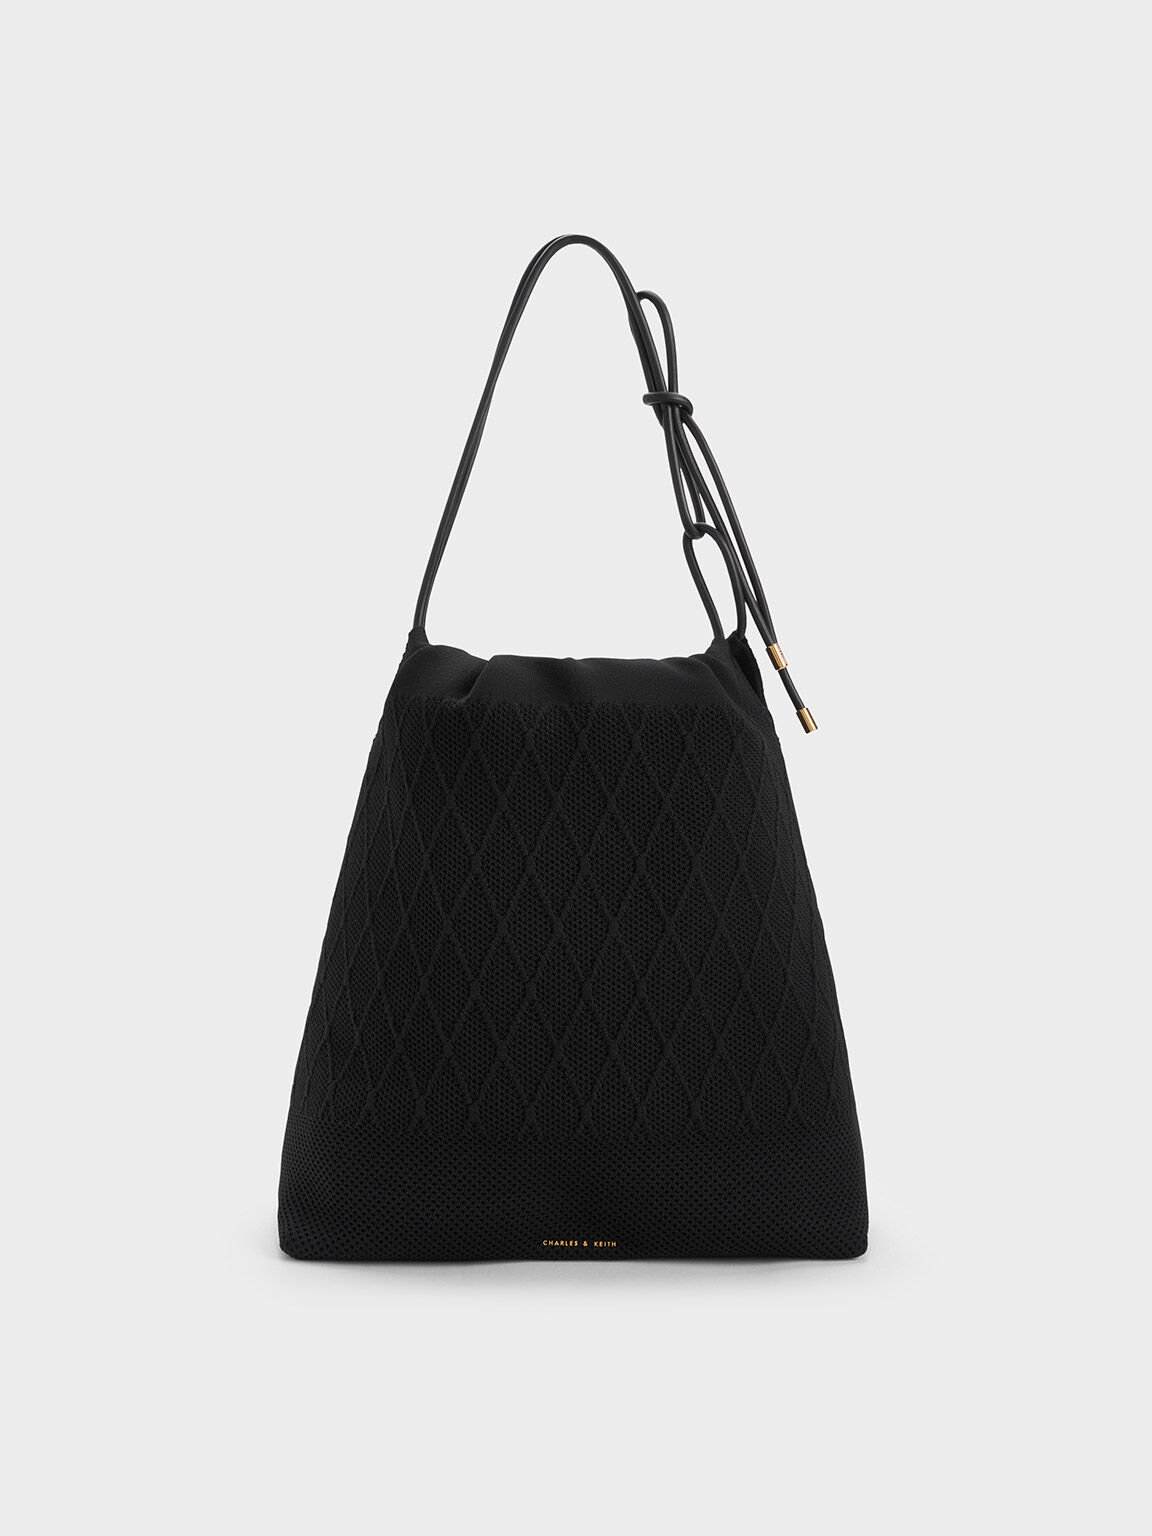 Genoa Bow-Tie Knitted Bag, Black, hi-res